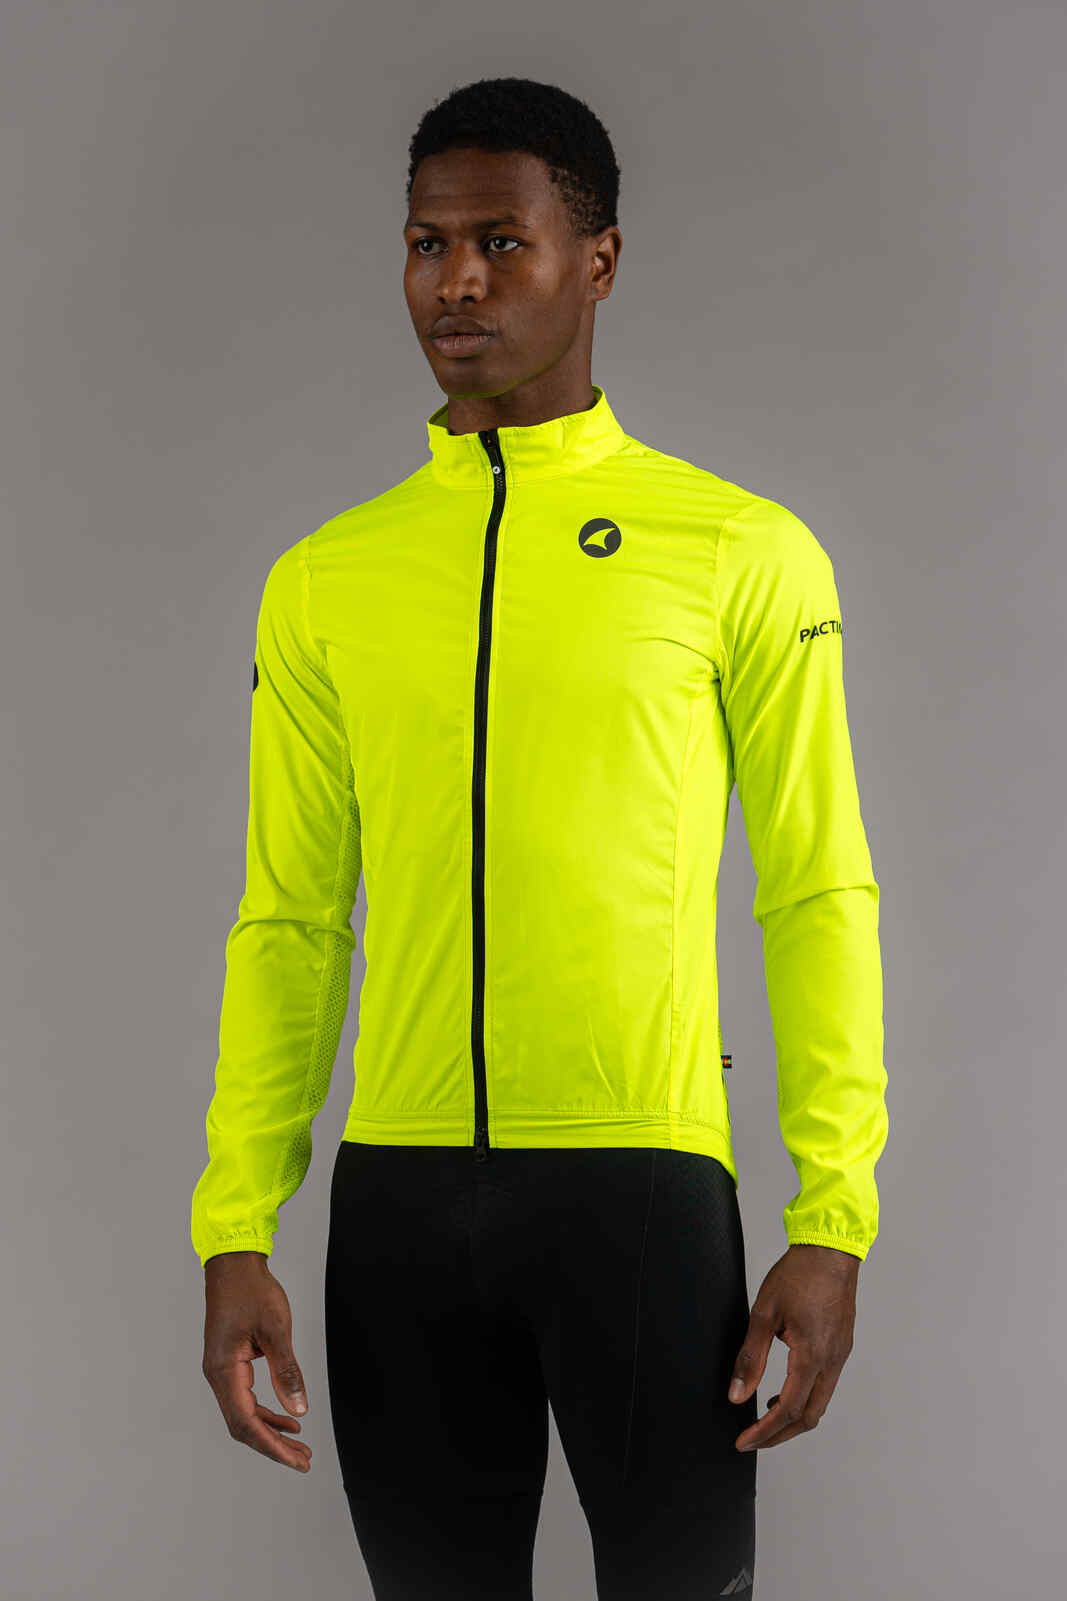 Men's Packable High-Viz Yellow Cycling Wind Jacket - Front View